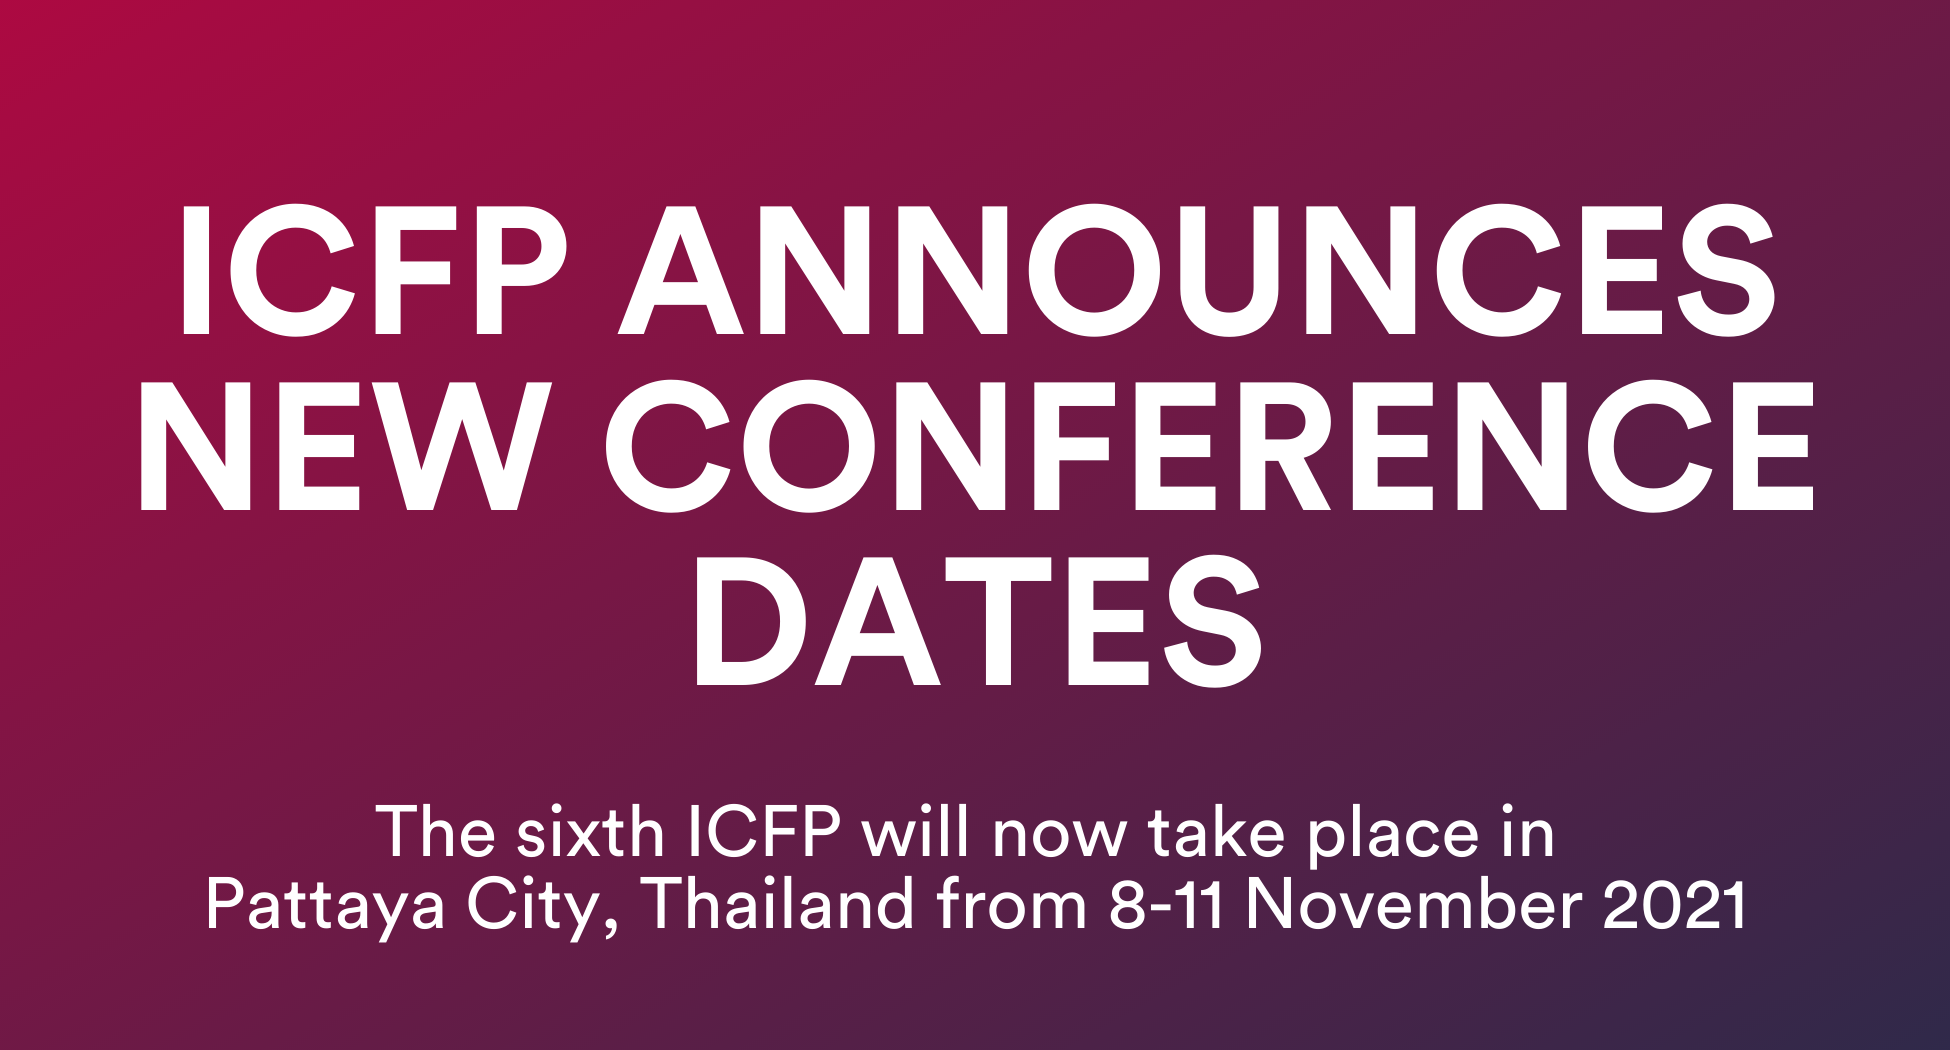 International Conference on Family Planning Announces New Dates for Sixth Conference in Pattaya City, Thailand: 8-11 November 2021